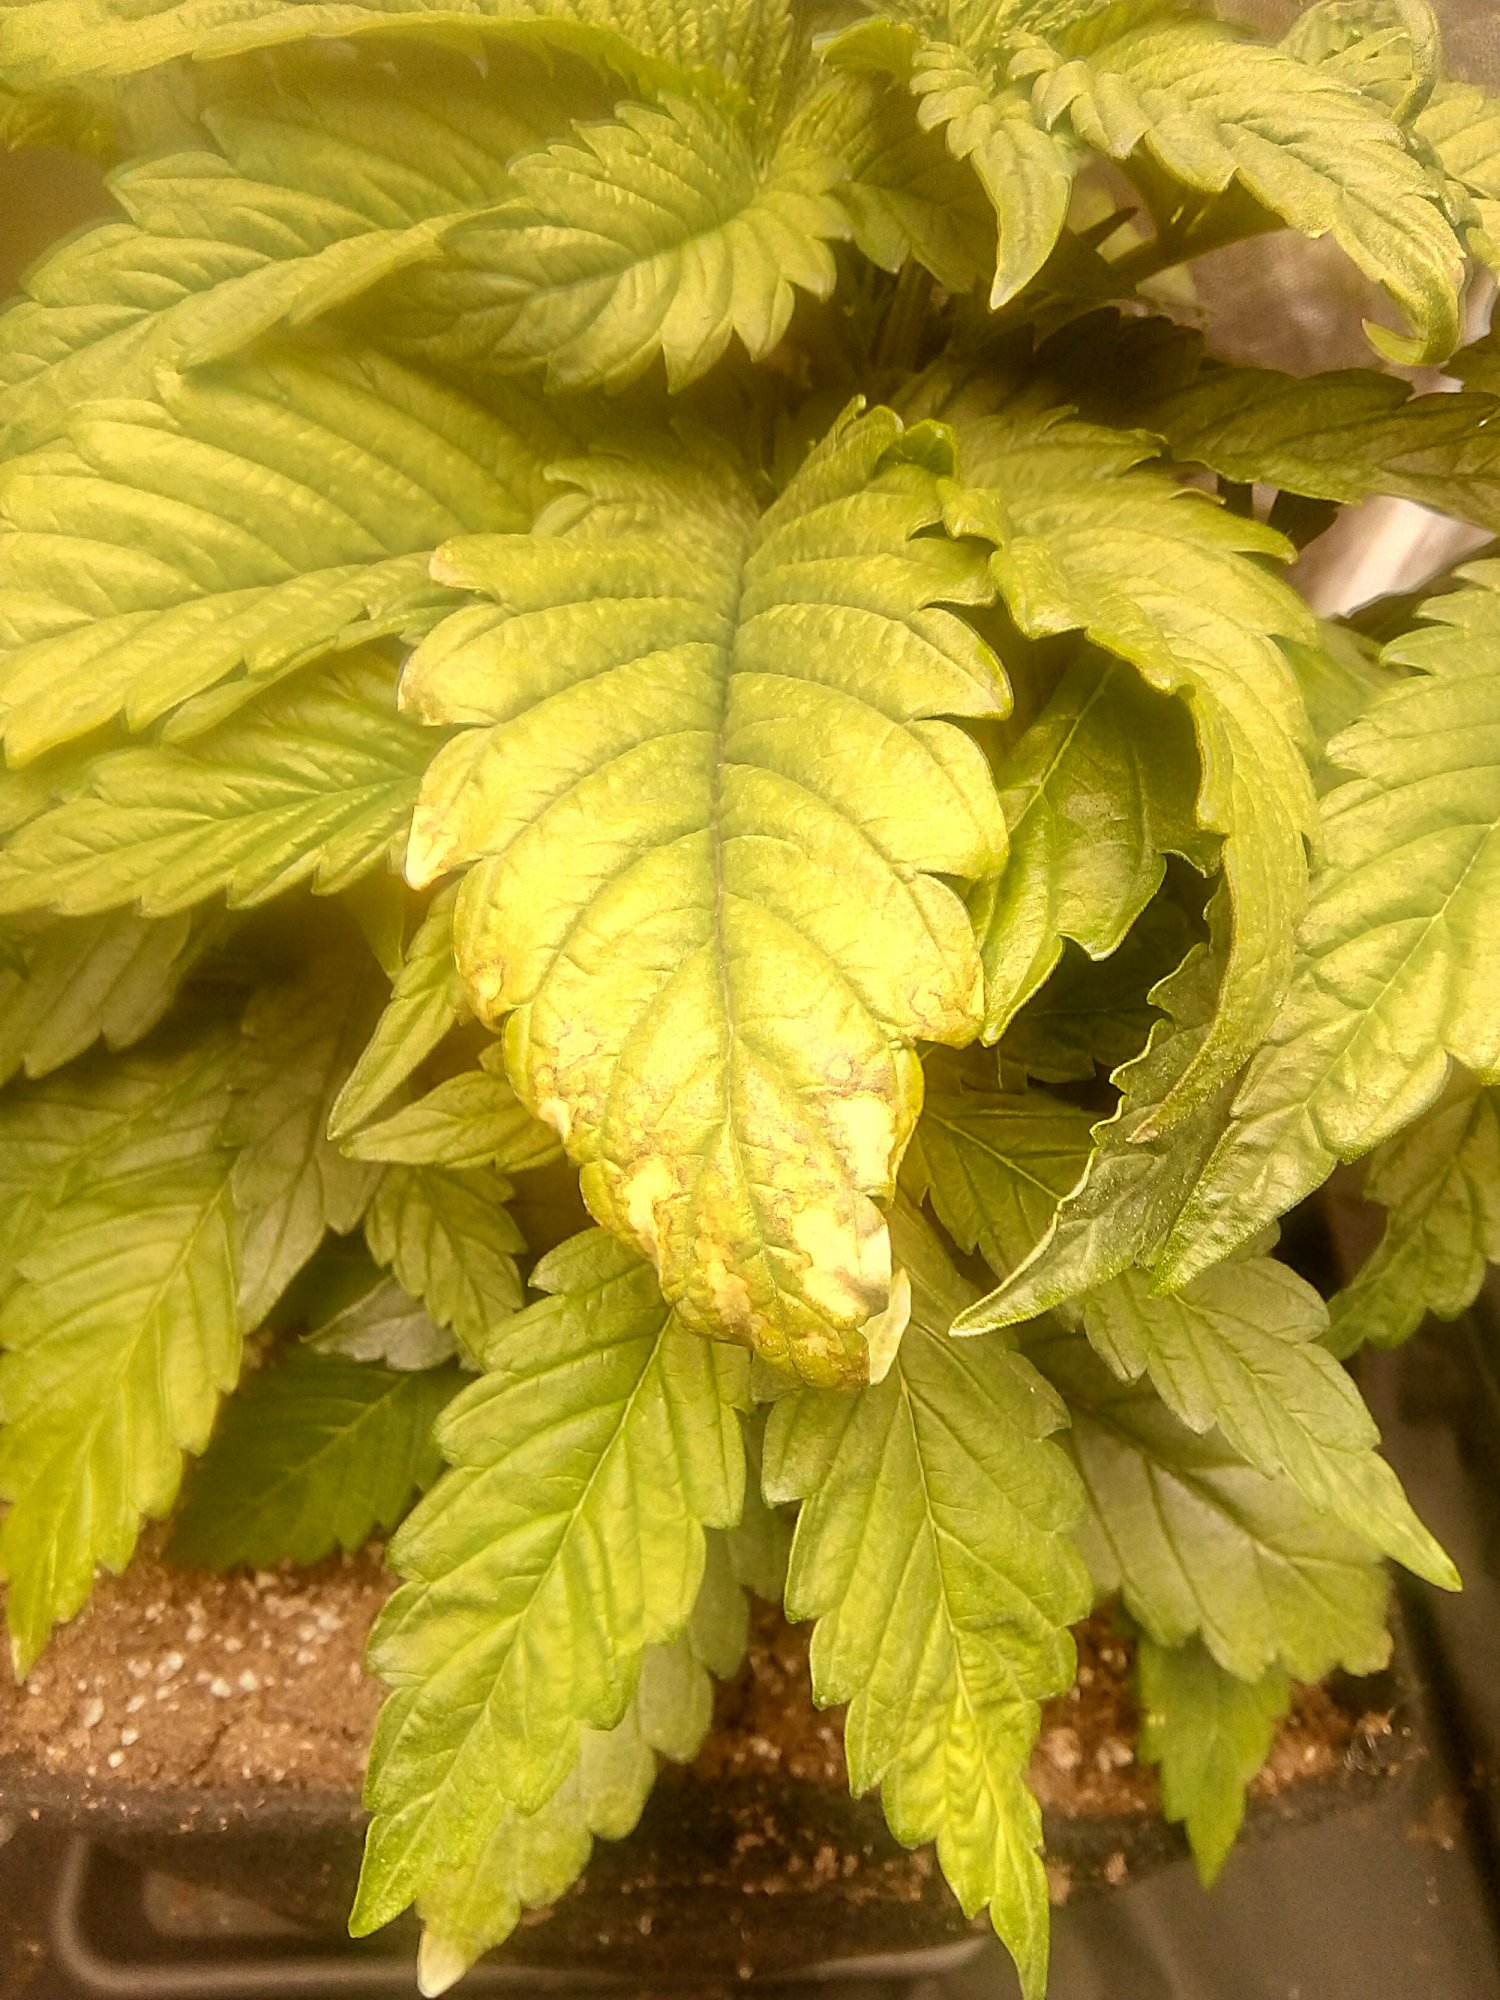 Brown spots on some leaves